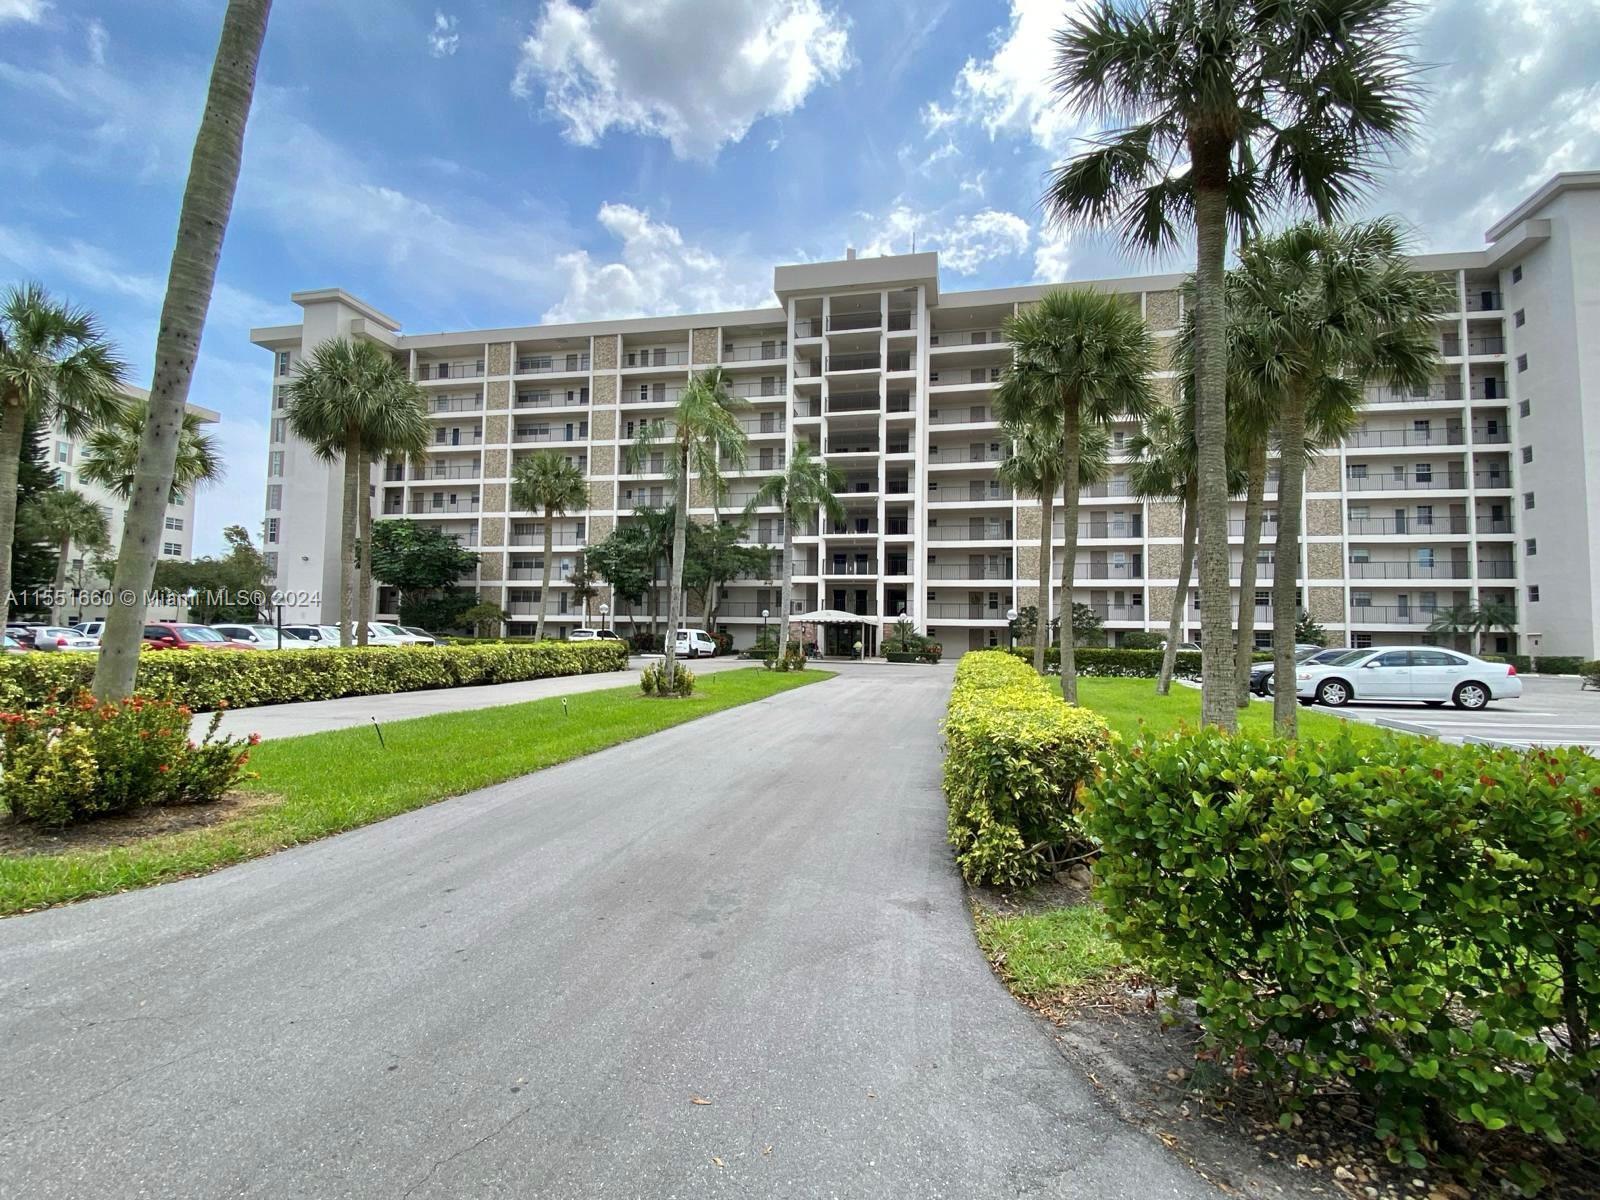 Photo of 3150 N Palm Aire Dr #404 in Pompano Beach, FL